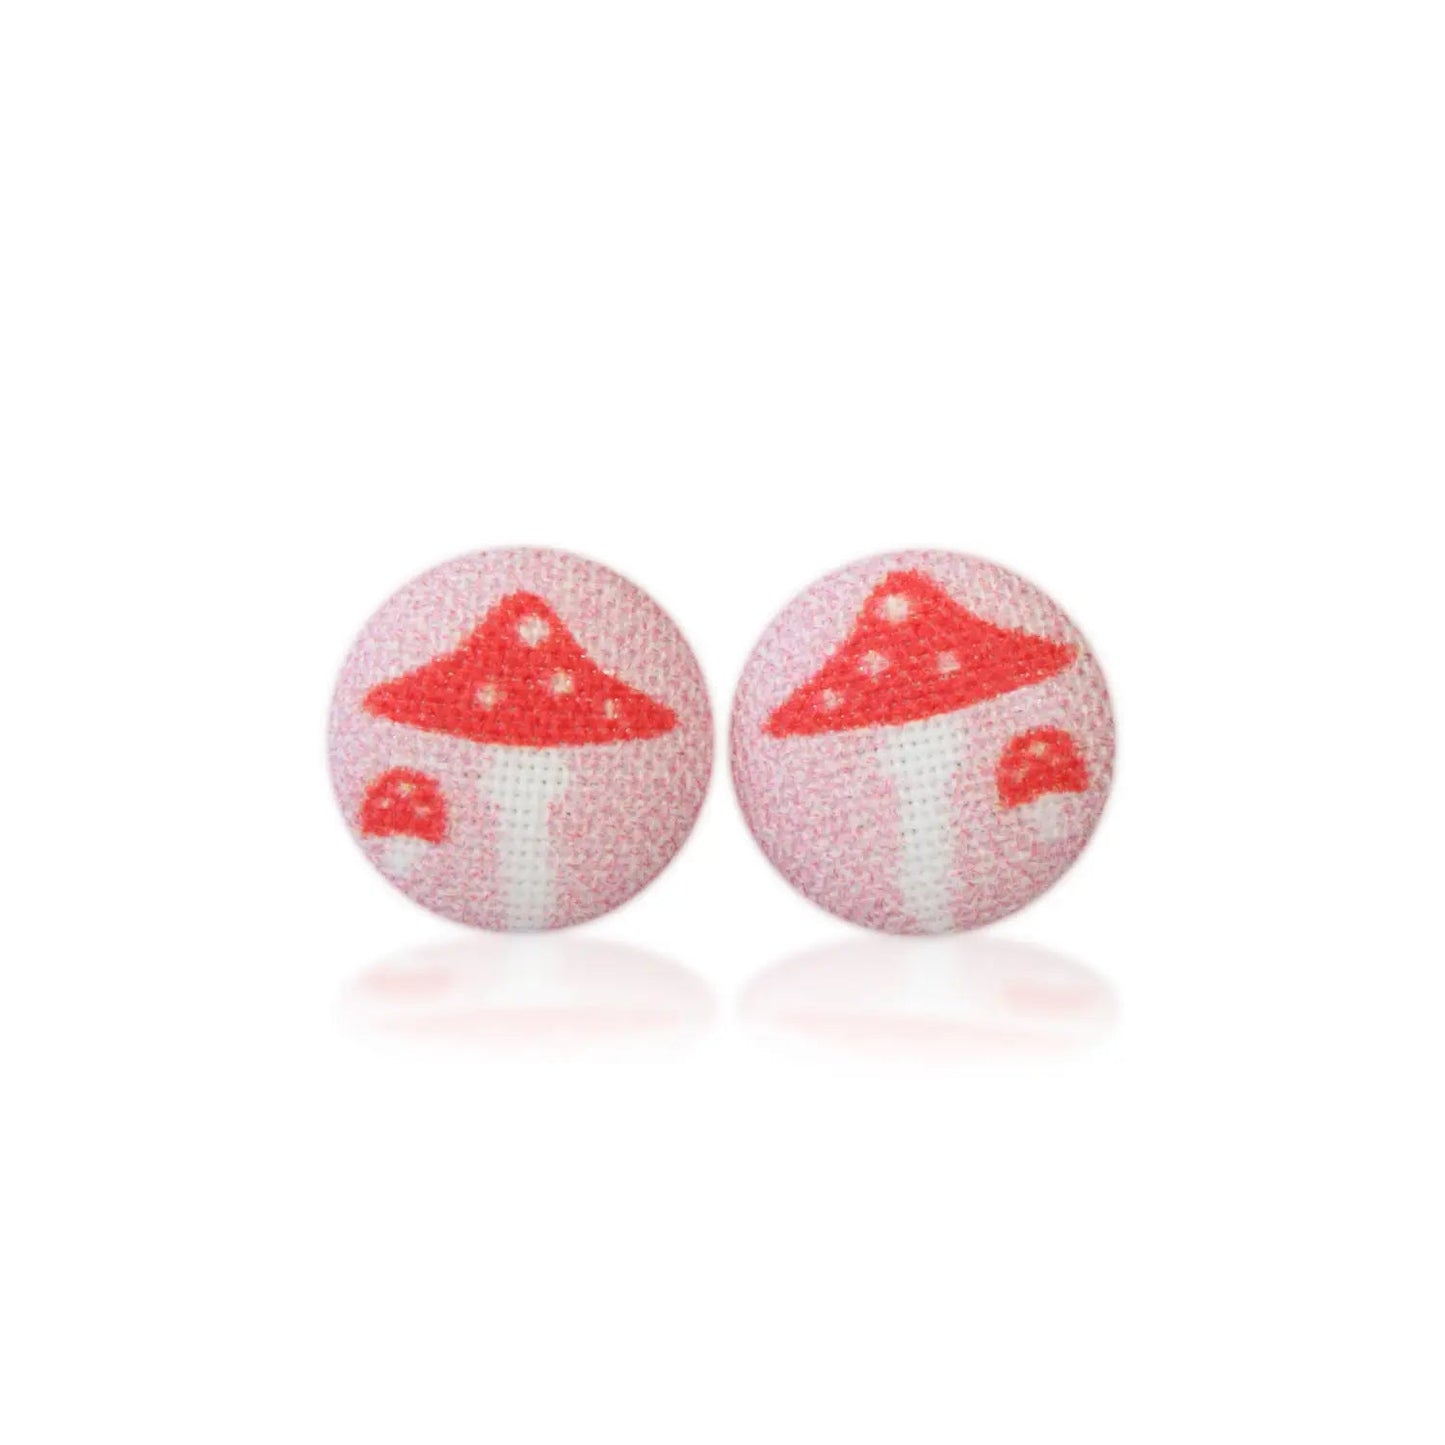 Pink Mushroom Fabric Button Earrings | Handmade in the US